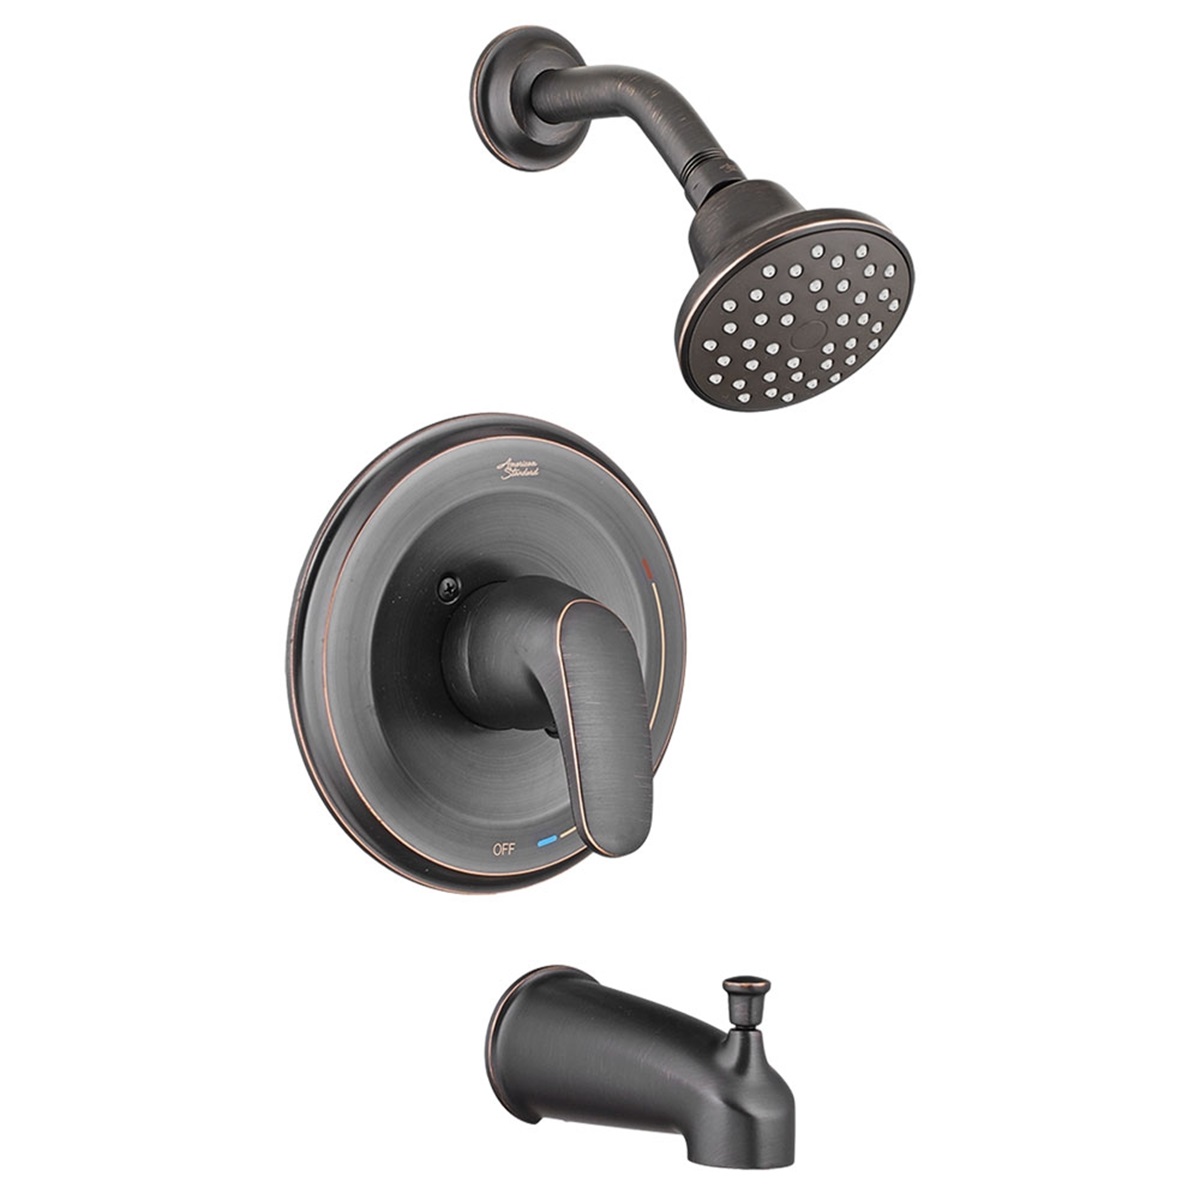 T075.507.278 COLONY PRO
SHOWER ONLY TRIM LEGACY BRONZE
A/S